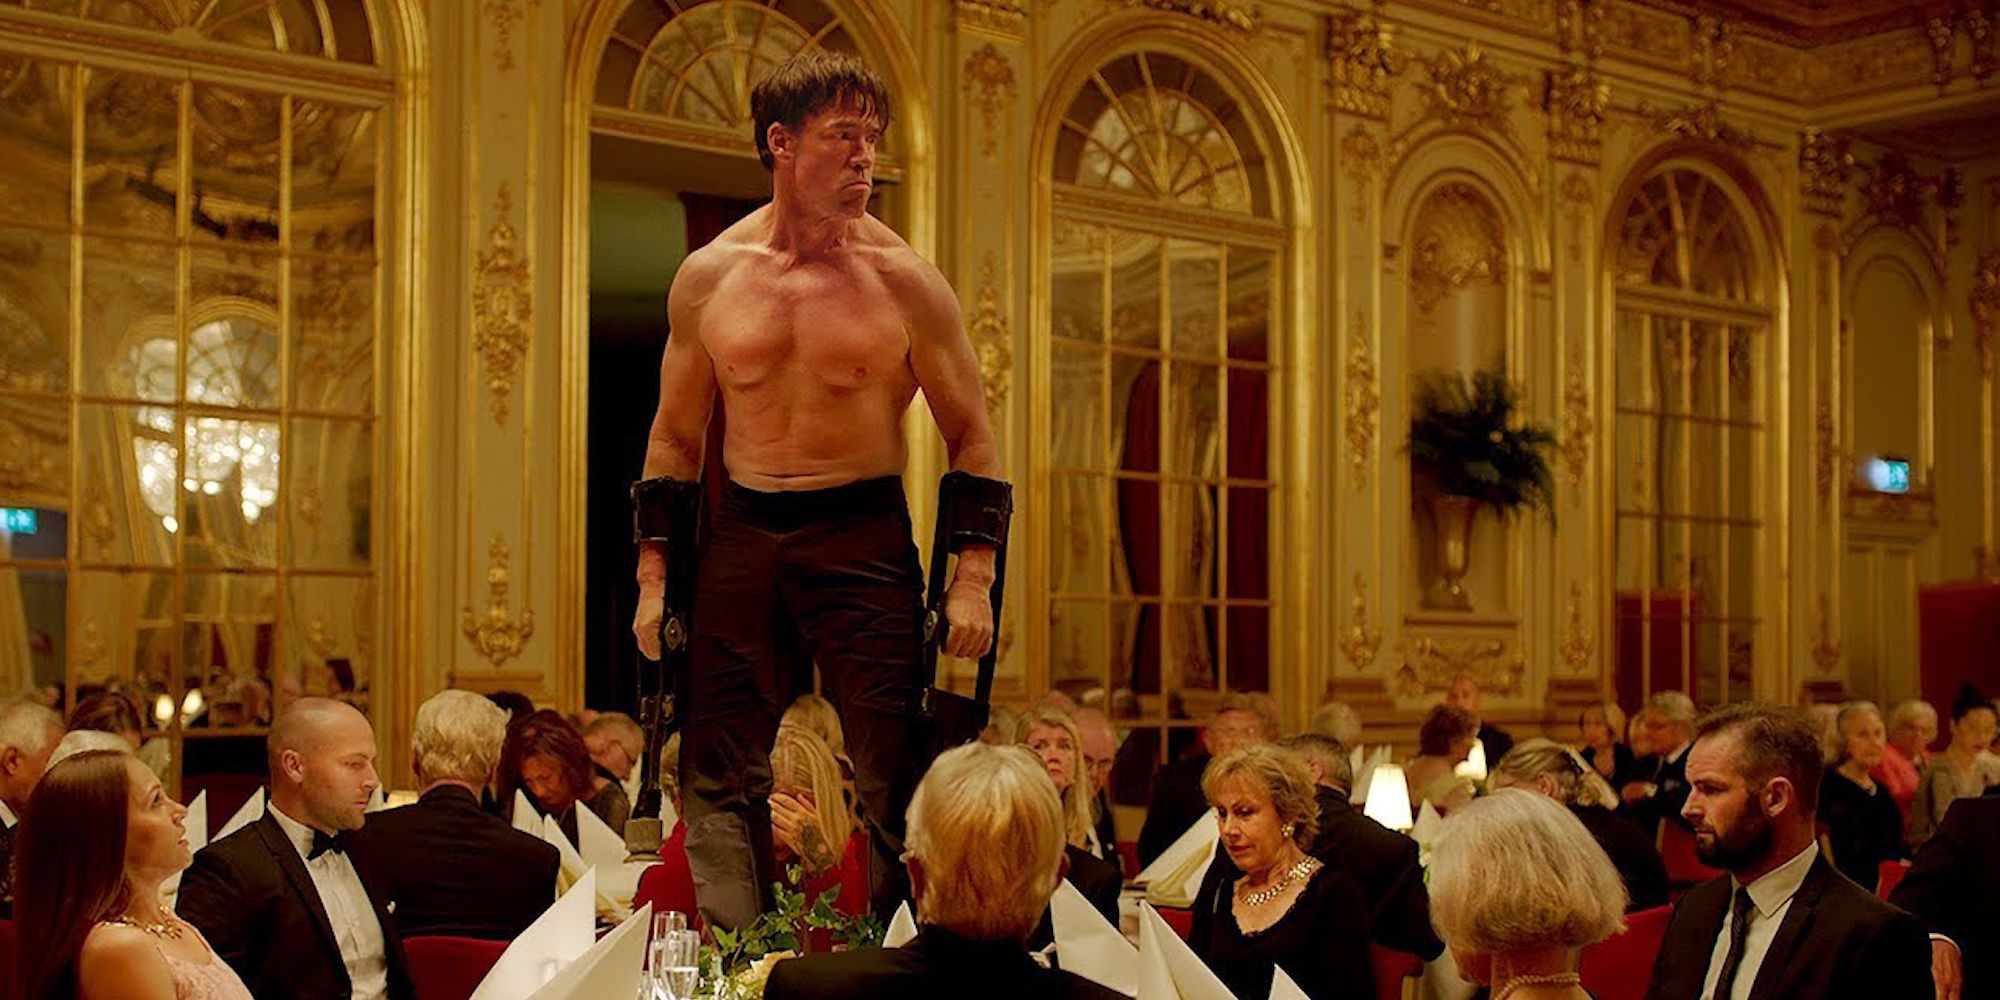 A shirtless man with arm contraptions stands at a black tie function. 